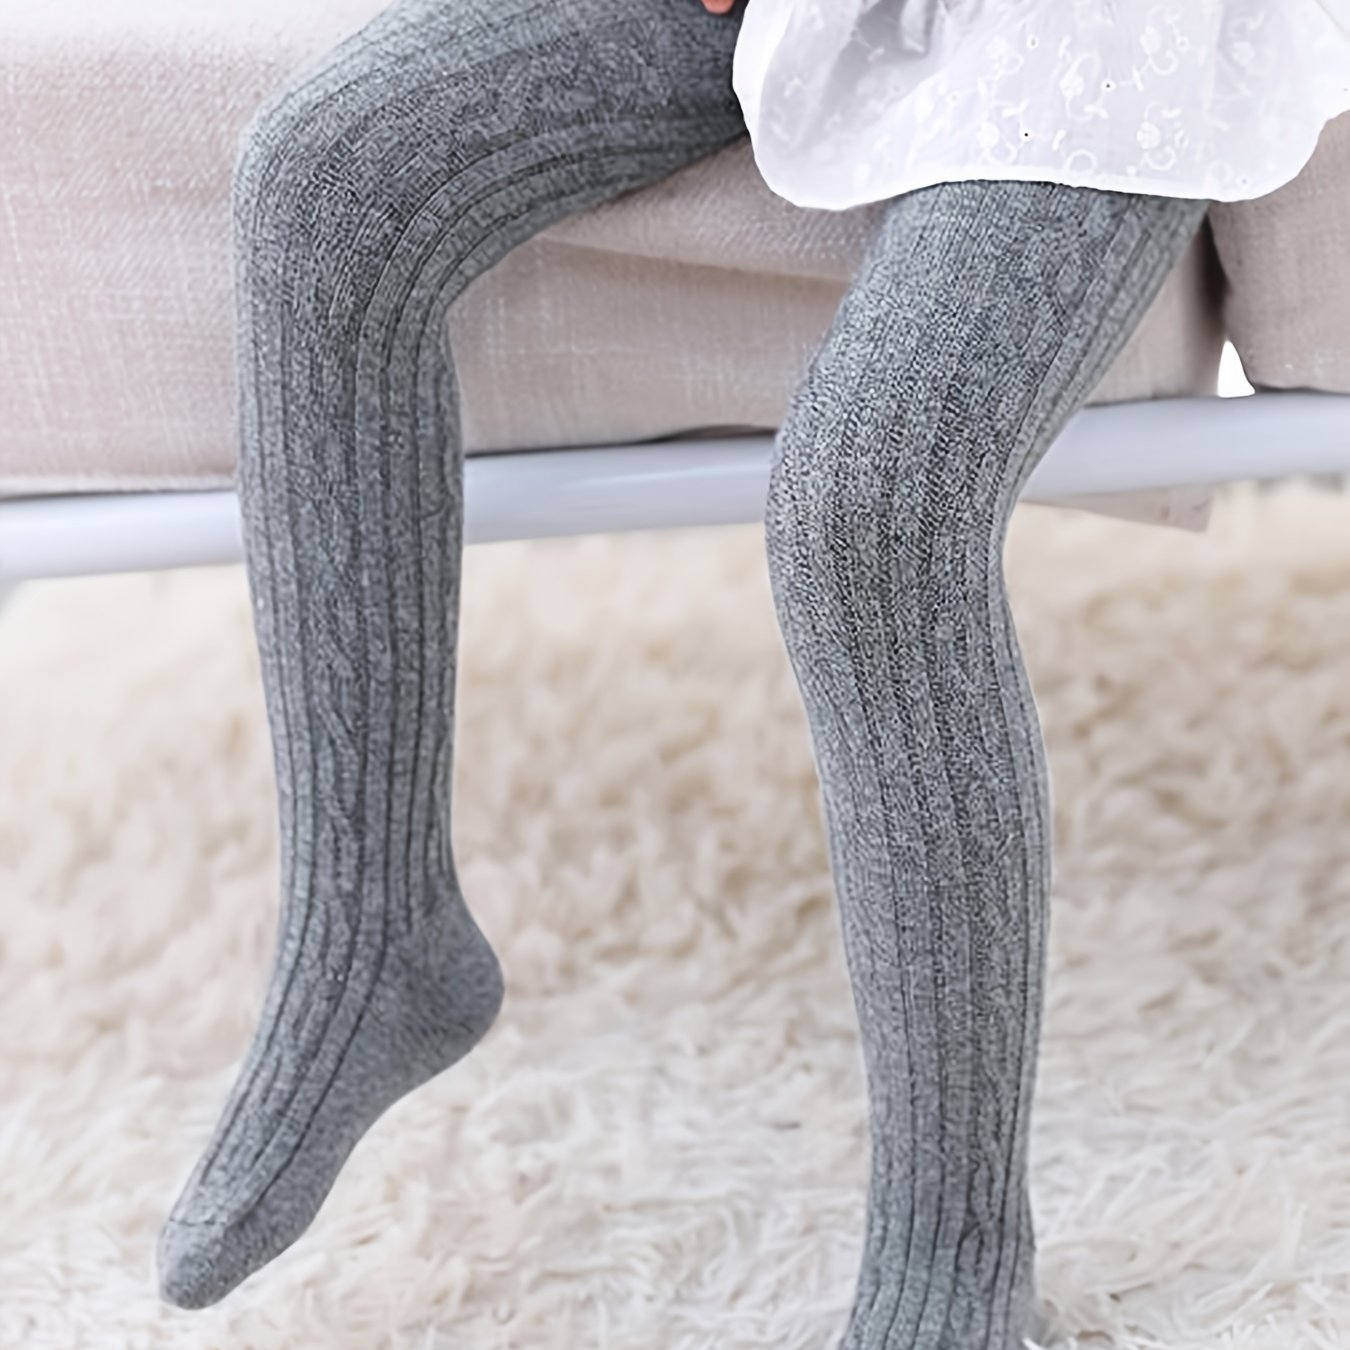 FZM Christmas Kids Baby Girls Tights Toddler Cable Knit Warm Leggings  Seamless Stretchy Stockings Pantyhose Winter Socks